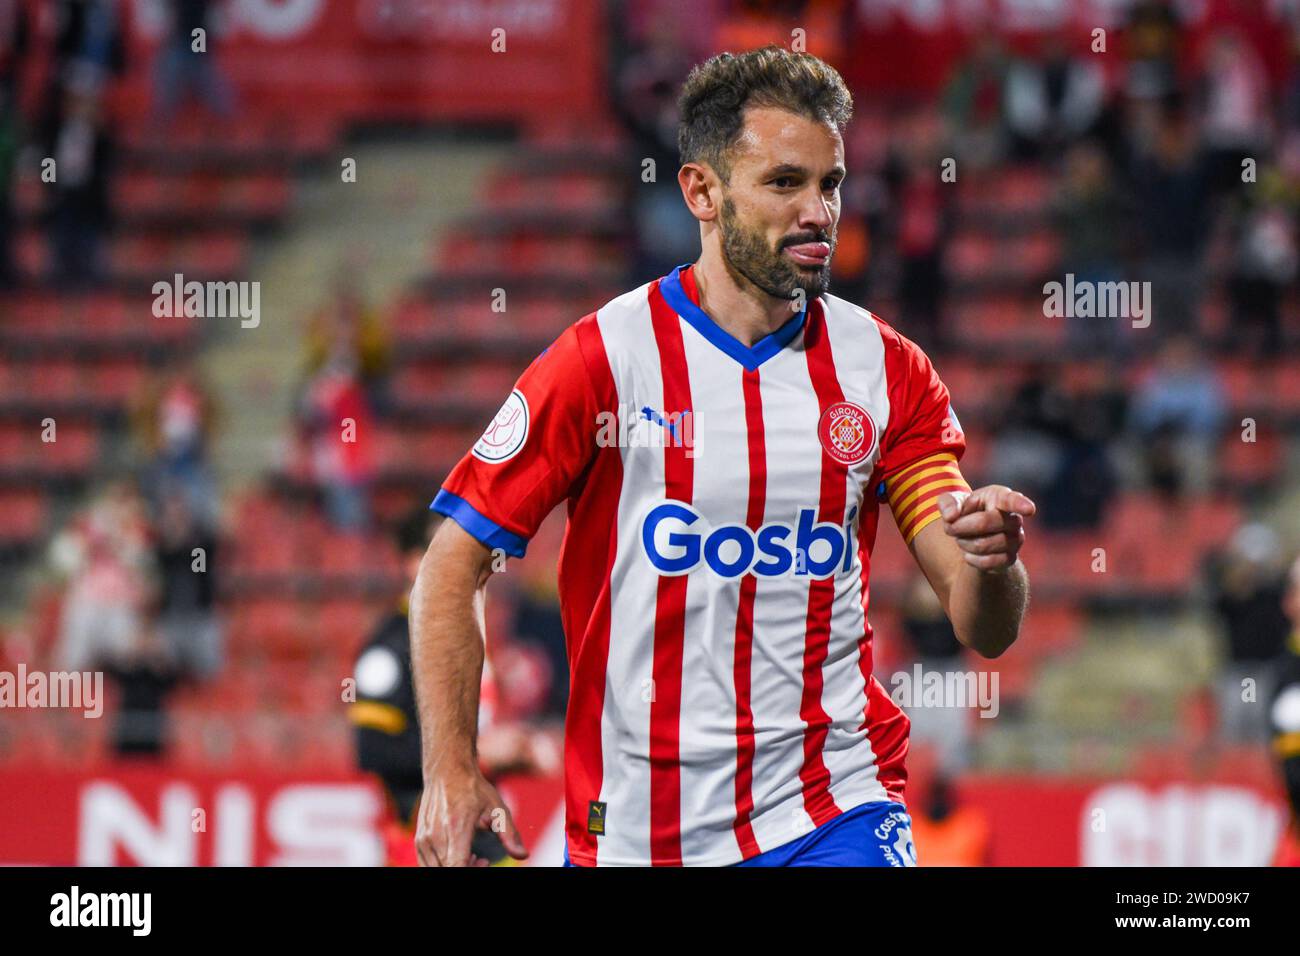 Girona, Spain. 17th Jan, 2024. GIRONA, SPAIN - JANUARY 17: Player of Girona FC Cristhian Stuani celebrates after scoring a goal during the match between Girona FC and Raya Vallecano as part of round 16 of Copa del Rey at Estadio Montilivi on January 17, 2024 in Girona, Spain. (Photo by Sara Aribó/PxImages) Credit: Px Images/Alamy Live News Stock Photo